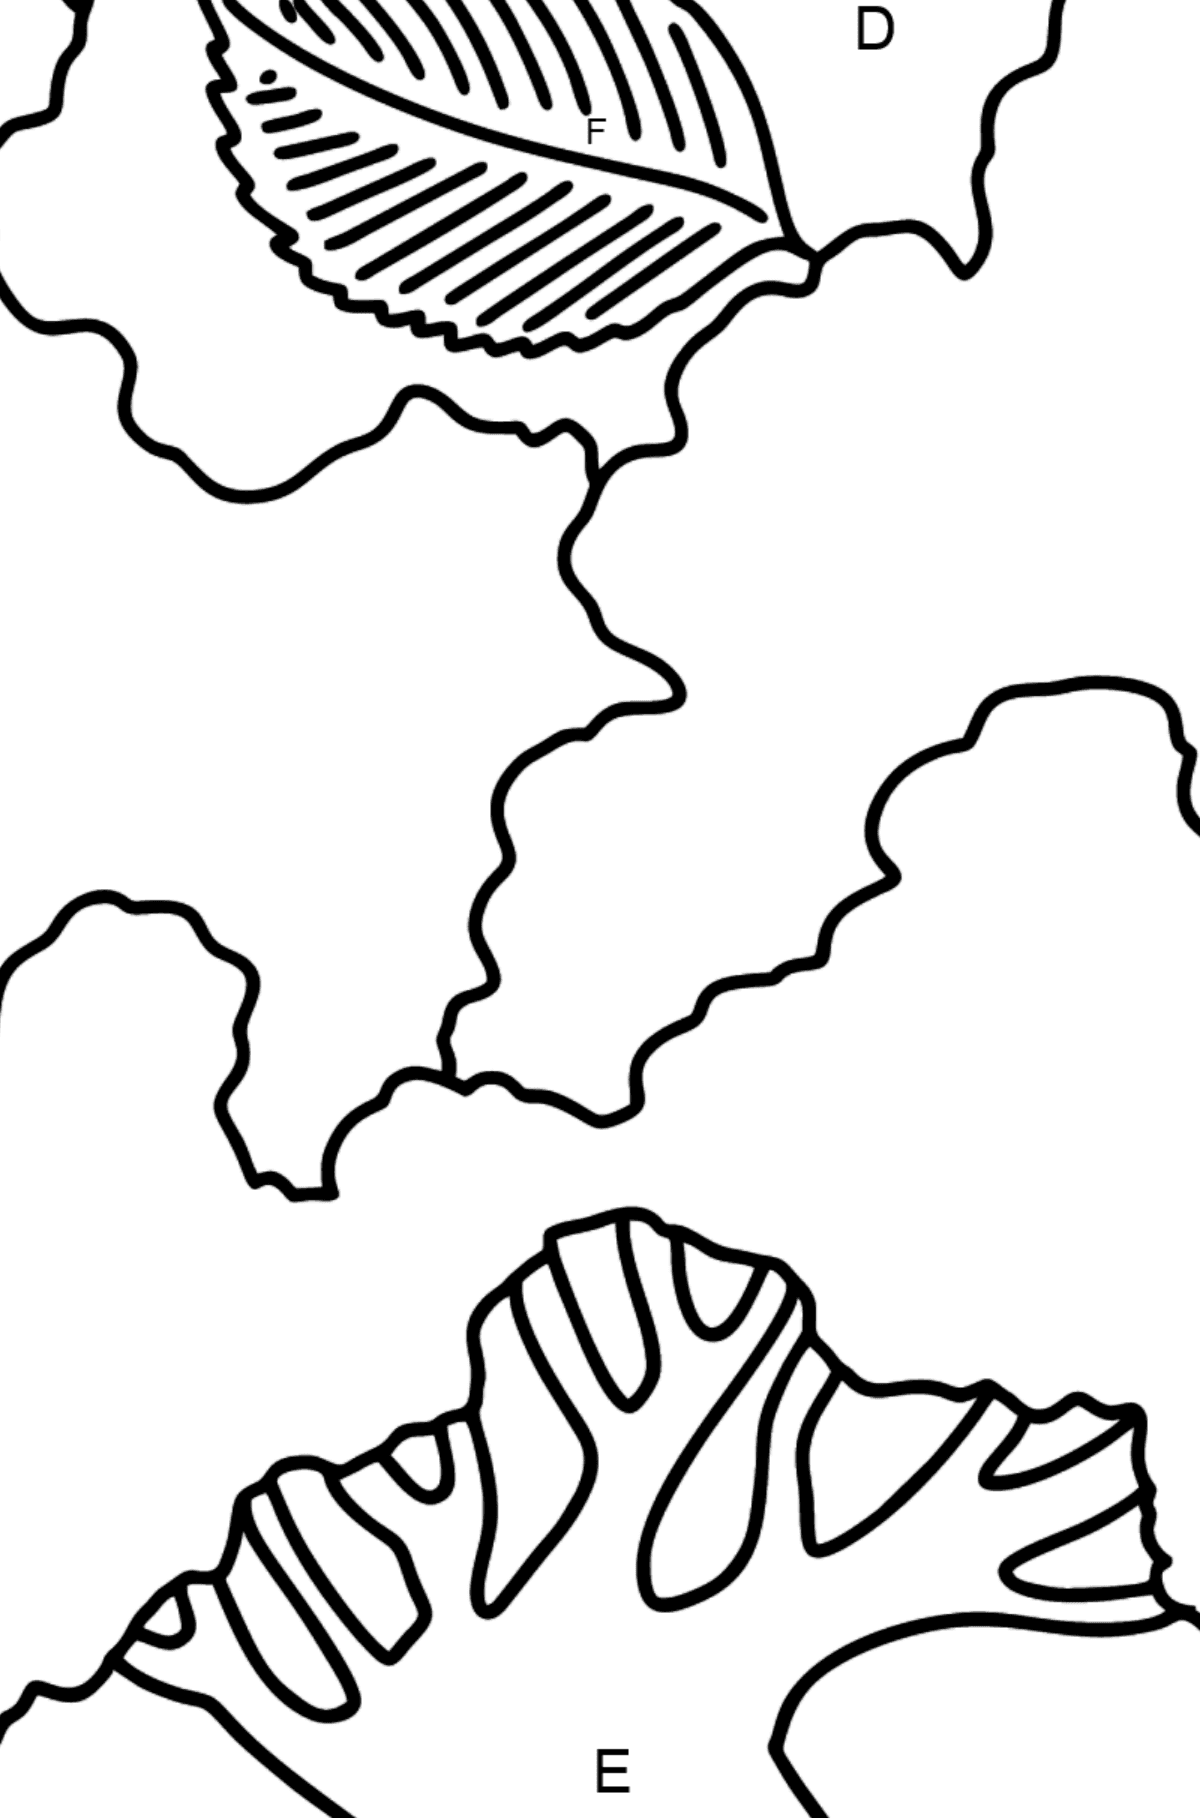 Elm coloring page - Coloring by Letters for Kids